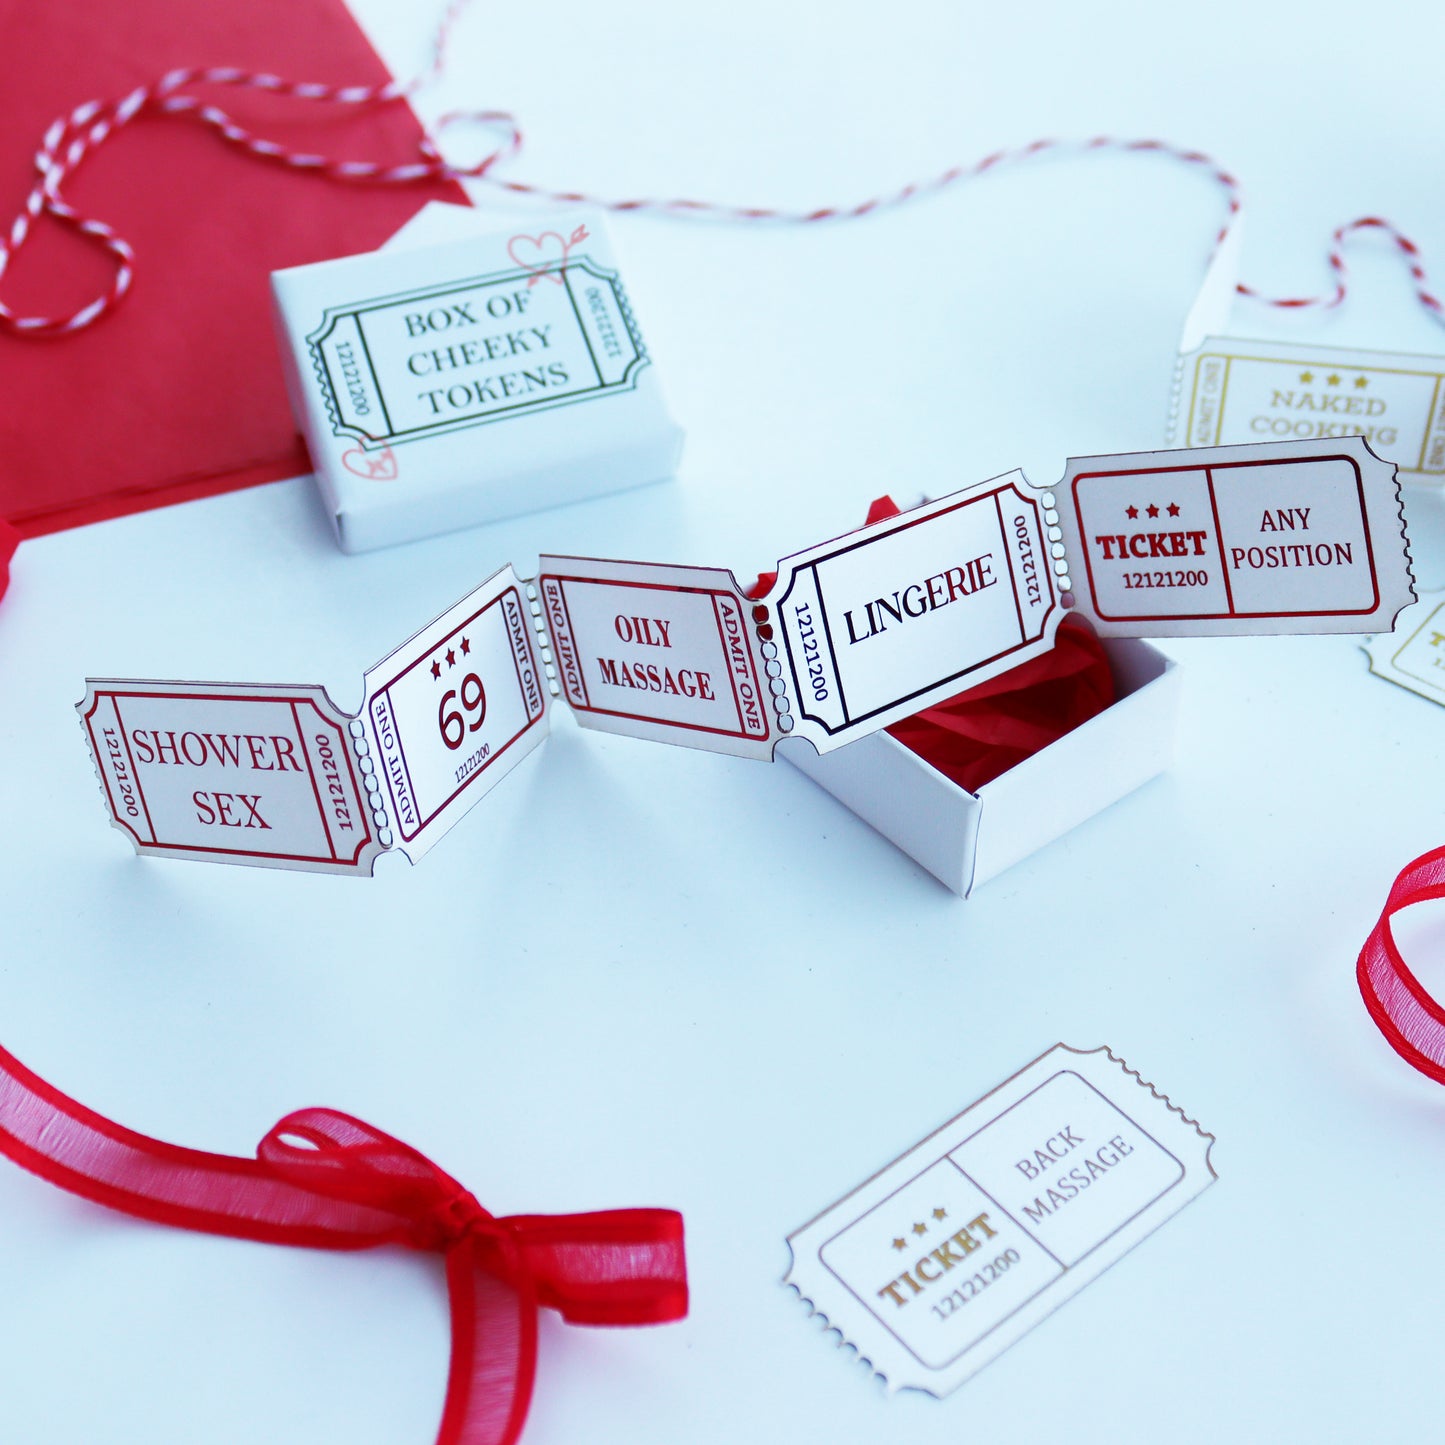 Personalised Cheeky Ticket Stub Tokens Valentine's Day